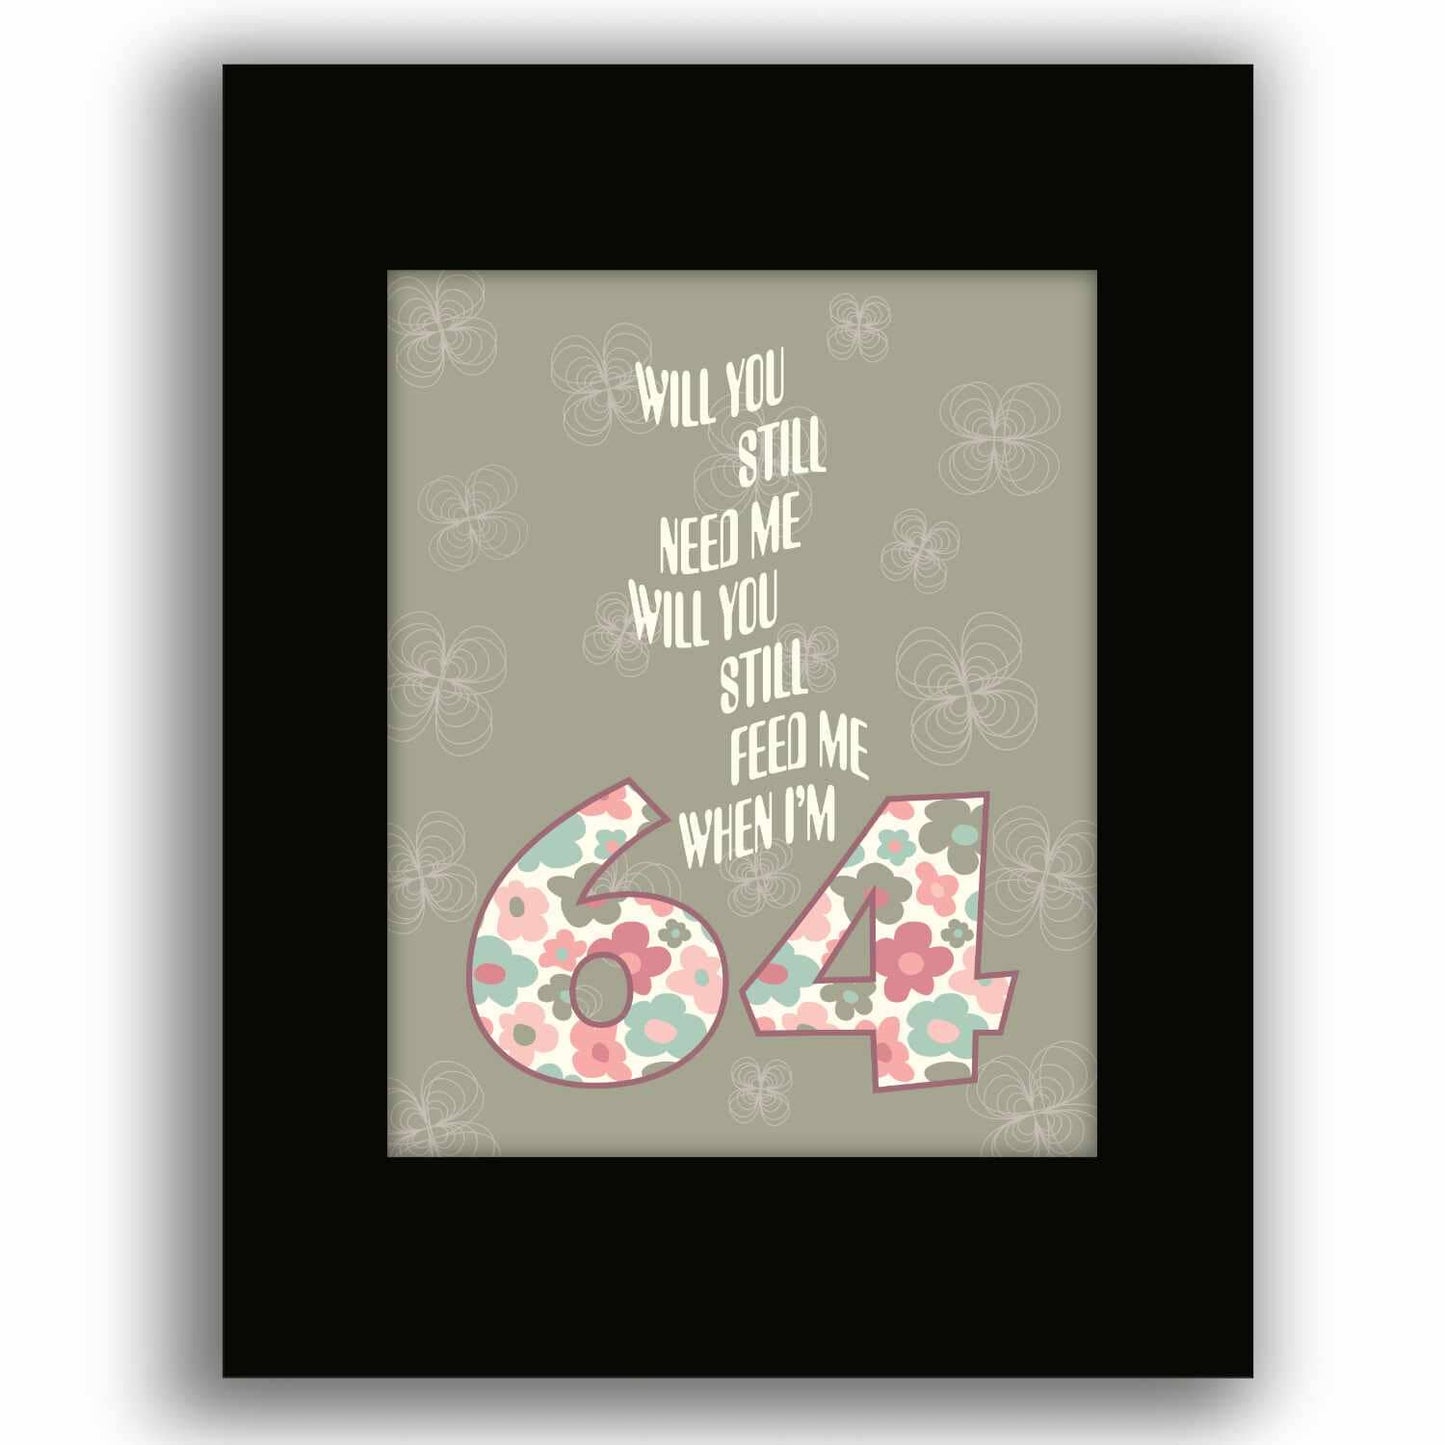 When I'm Sixty-Four 64 by the Beatles - Song Lyric Art Print Song Lyrics Art Song Lyrics Art 8x10 Black Matted Print 